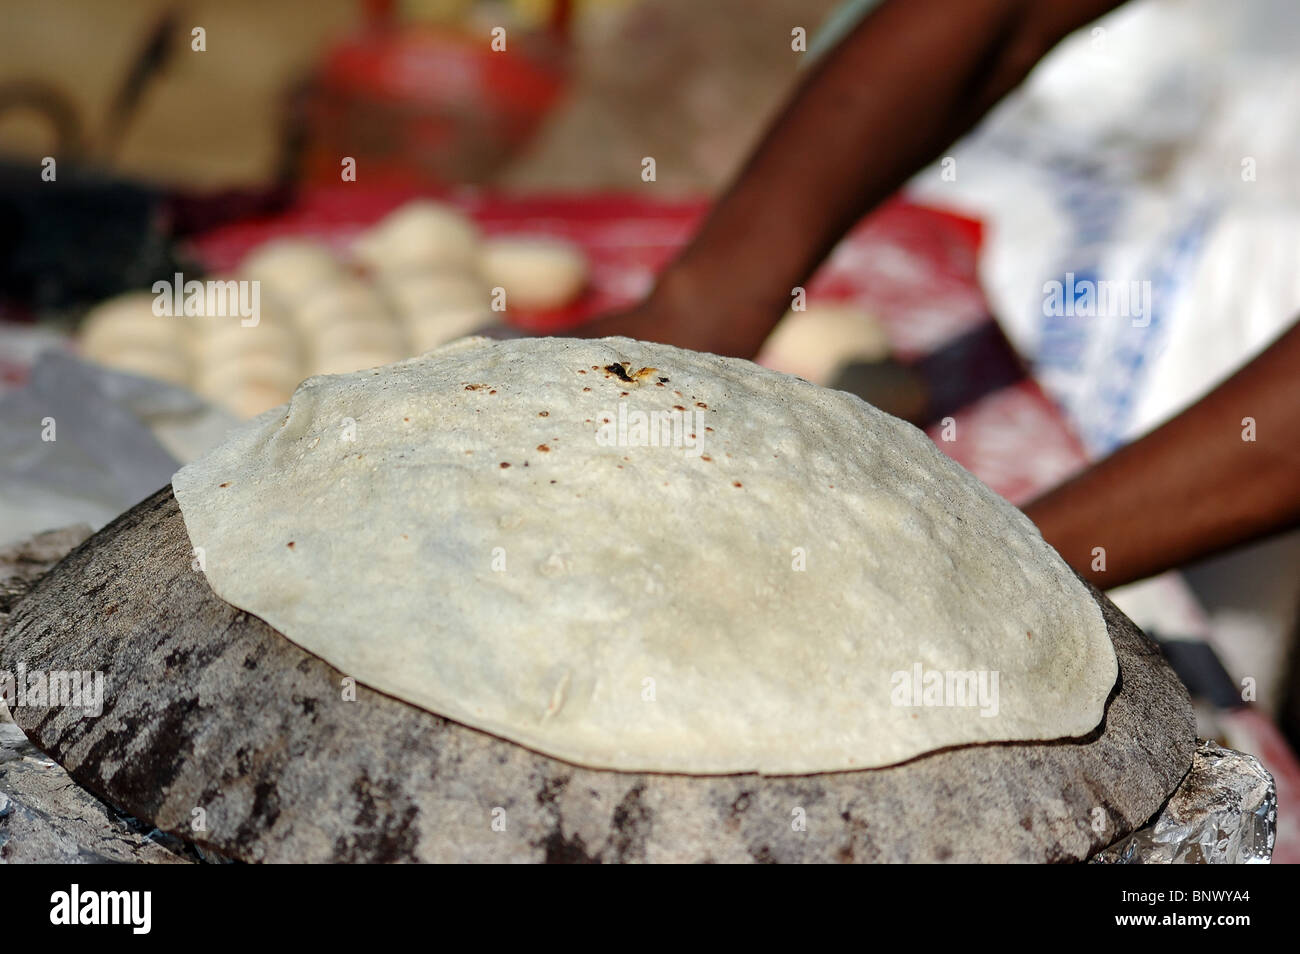 Cooking local/regional cuisine - Roomali Roti (a type of pancake bread) Stock Photo